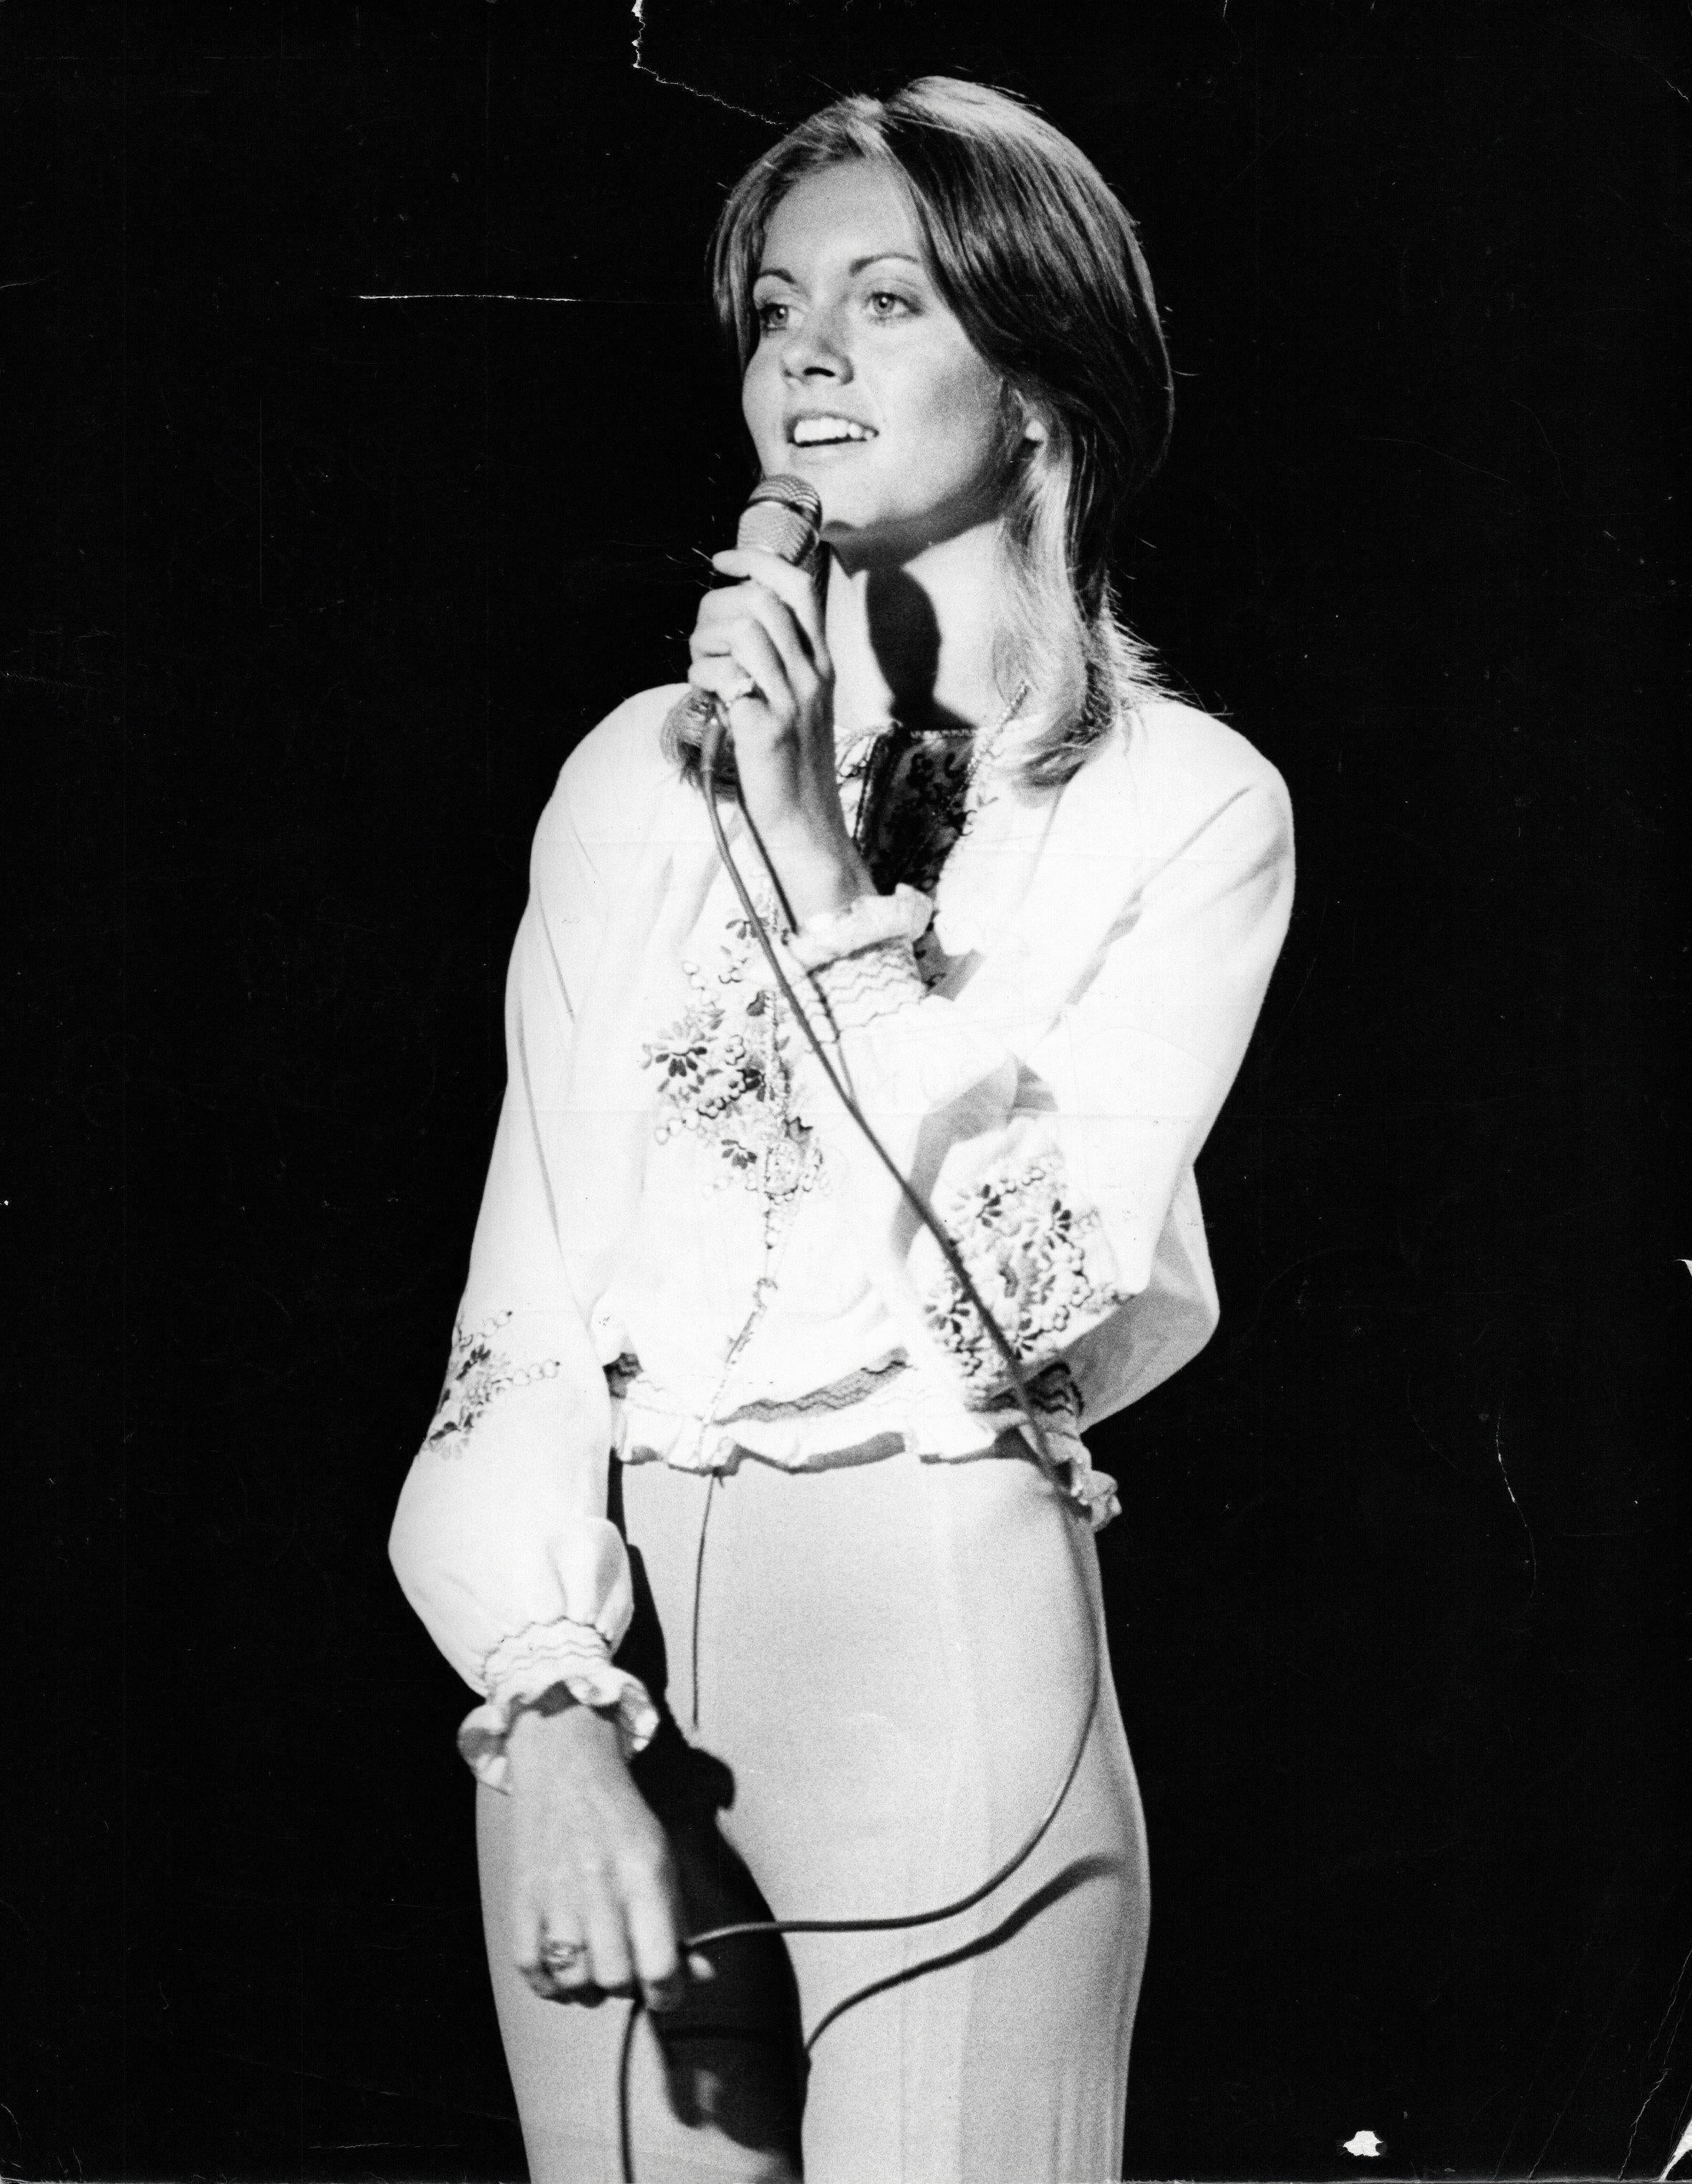 Unknown Black and White Photograph - Olivia Newton John with Microphone Vintage Original Photograph